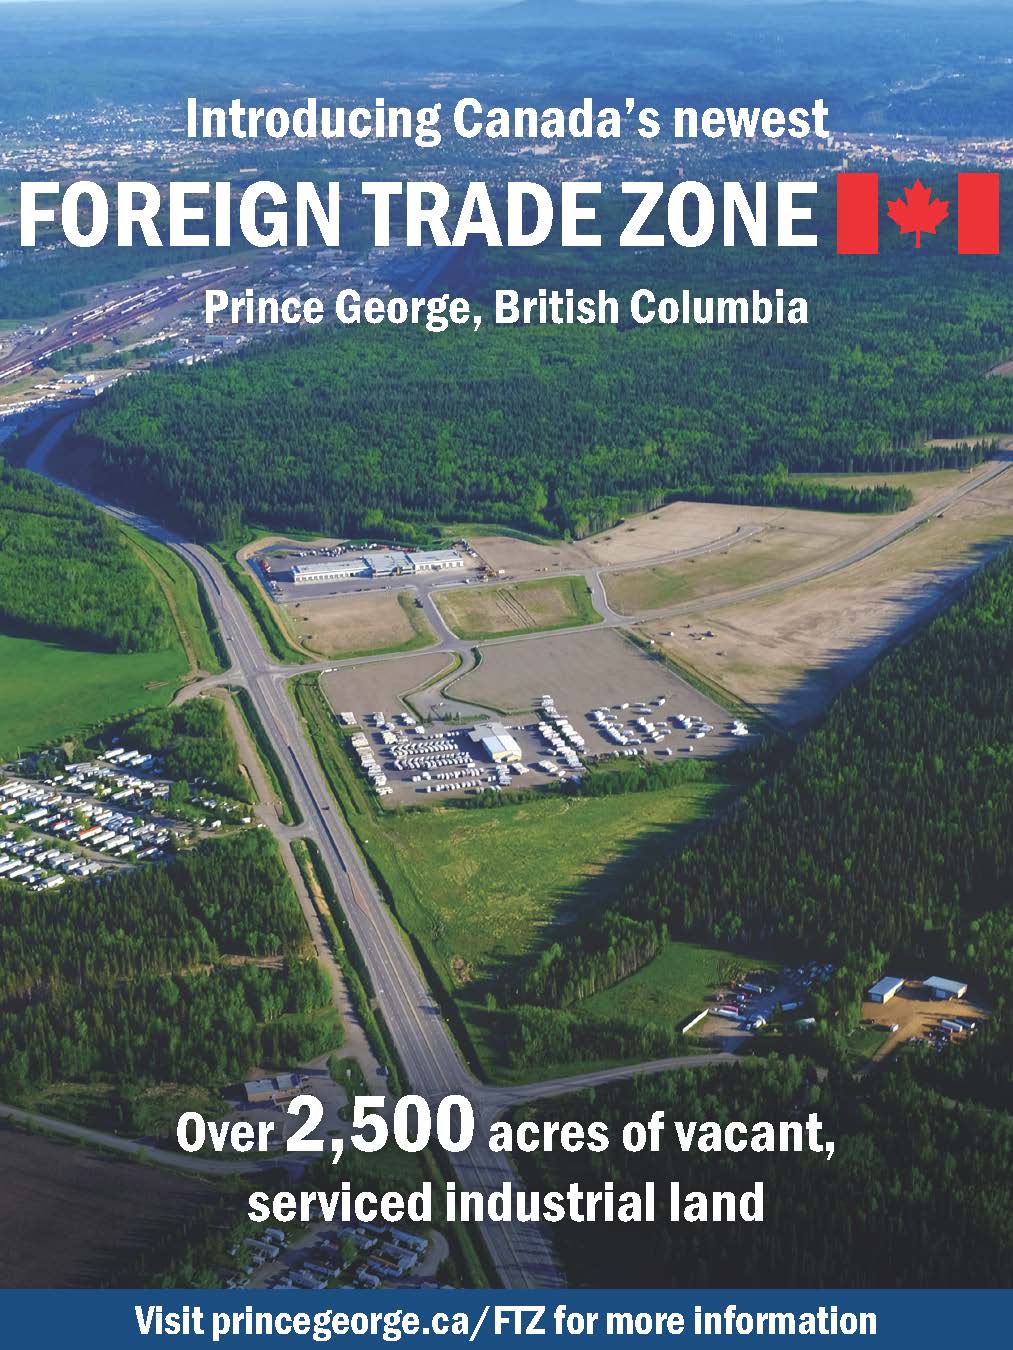 Prince George Foreign Trade Zone (FTZ)